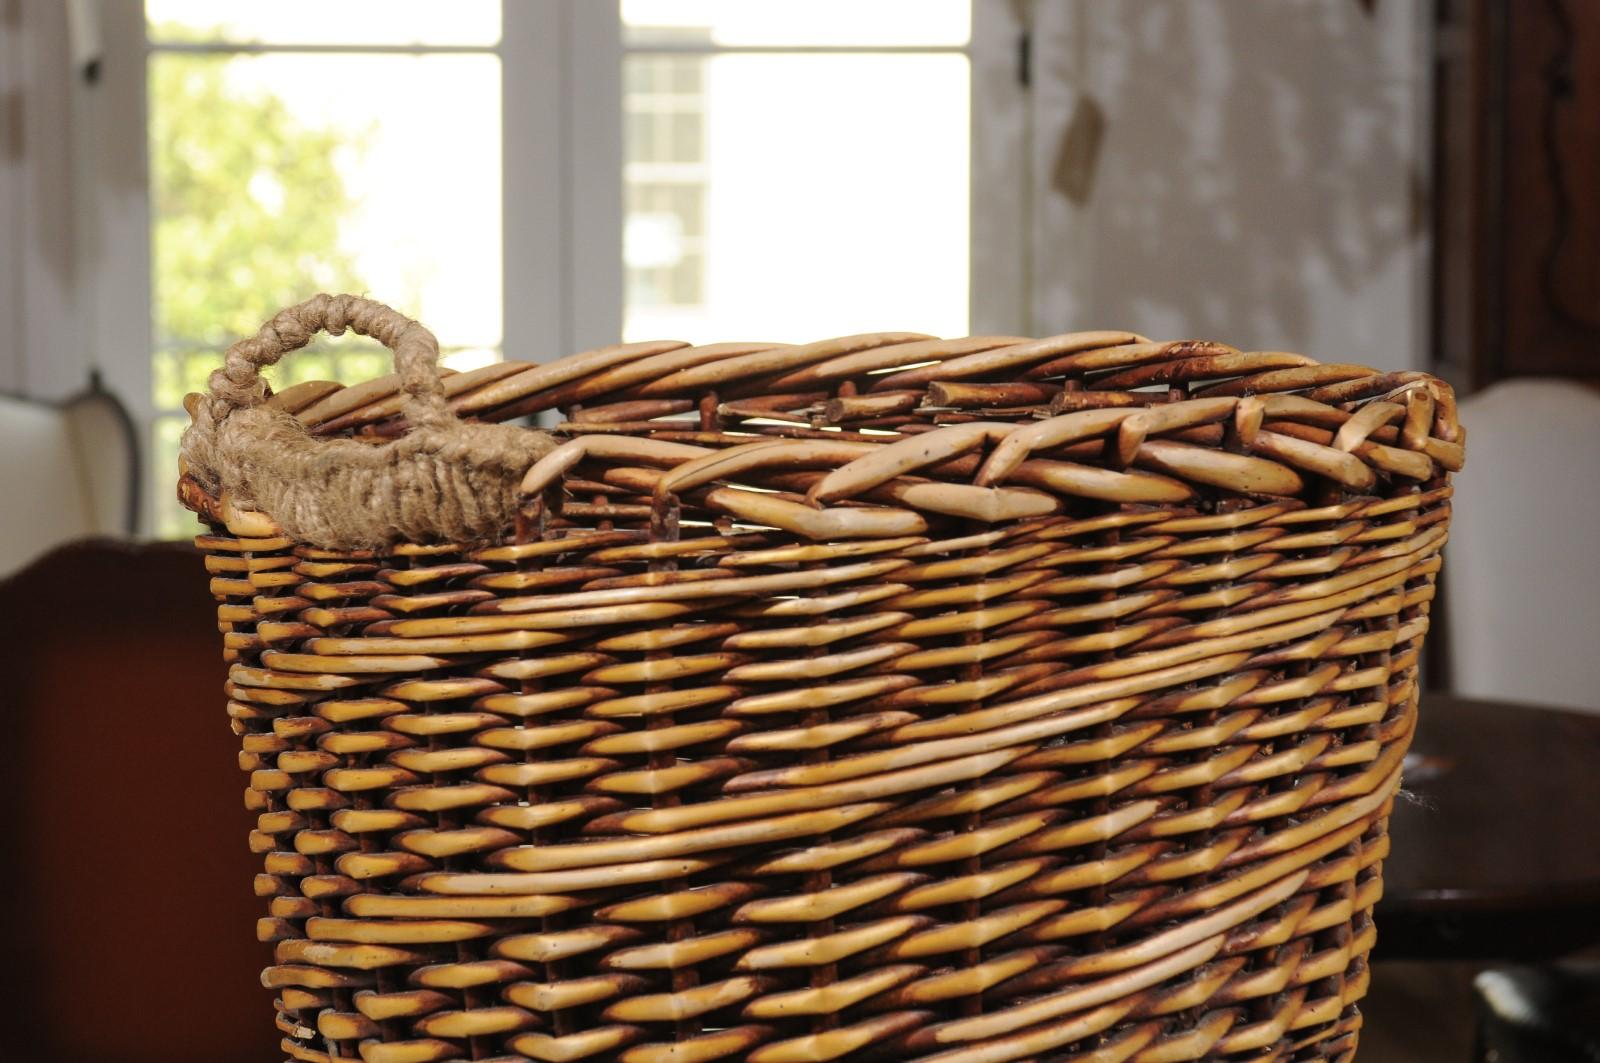 20th Century Rustic French Wicker Basket with Single Lateral Handle and Diagonal Patterns